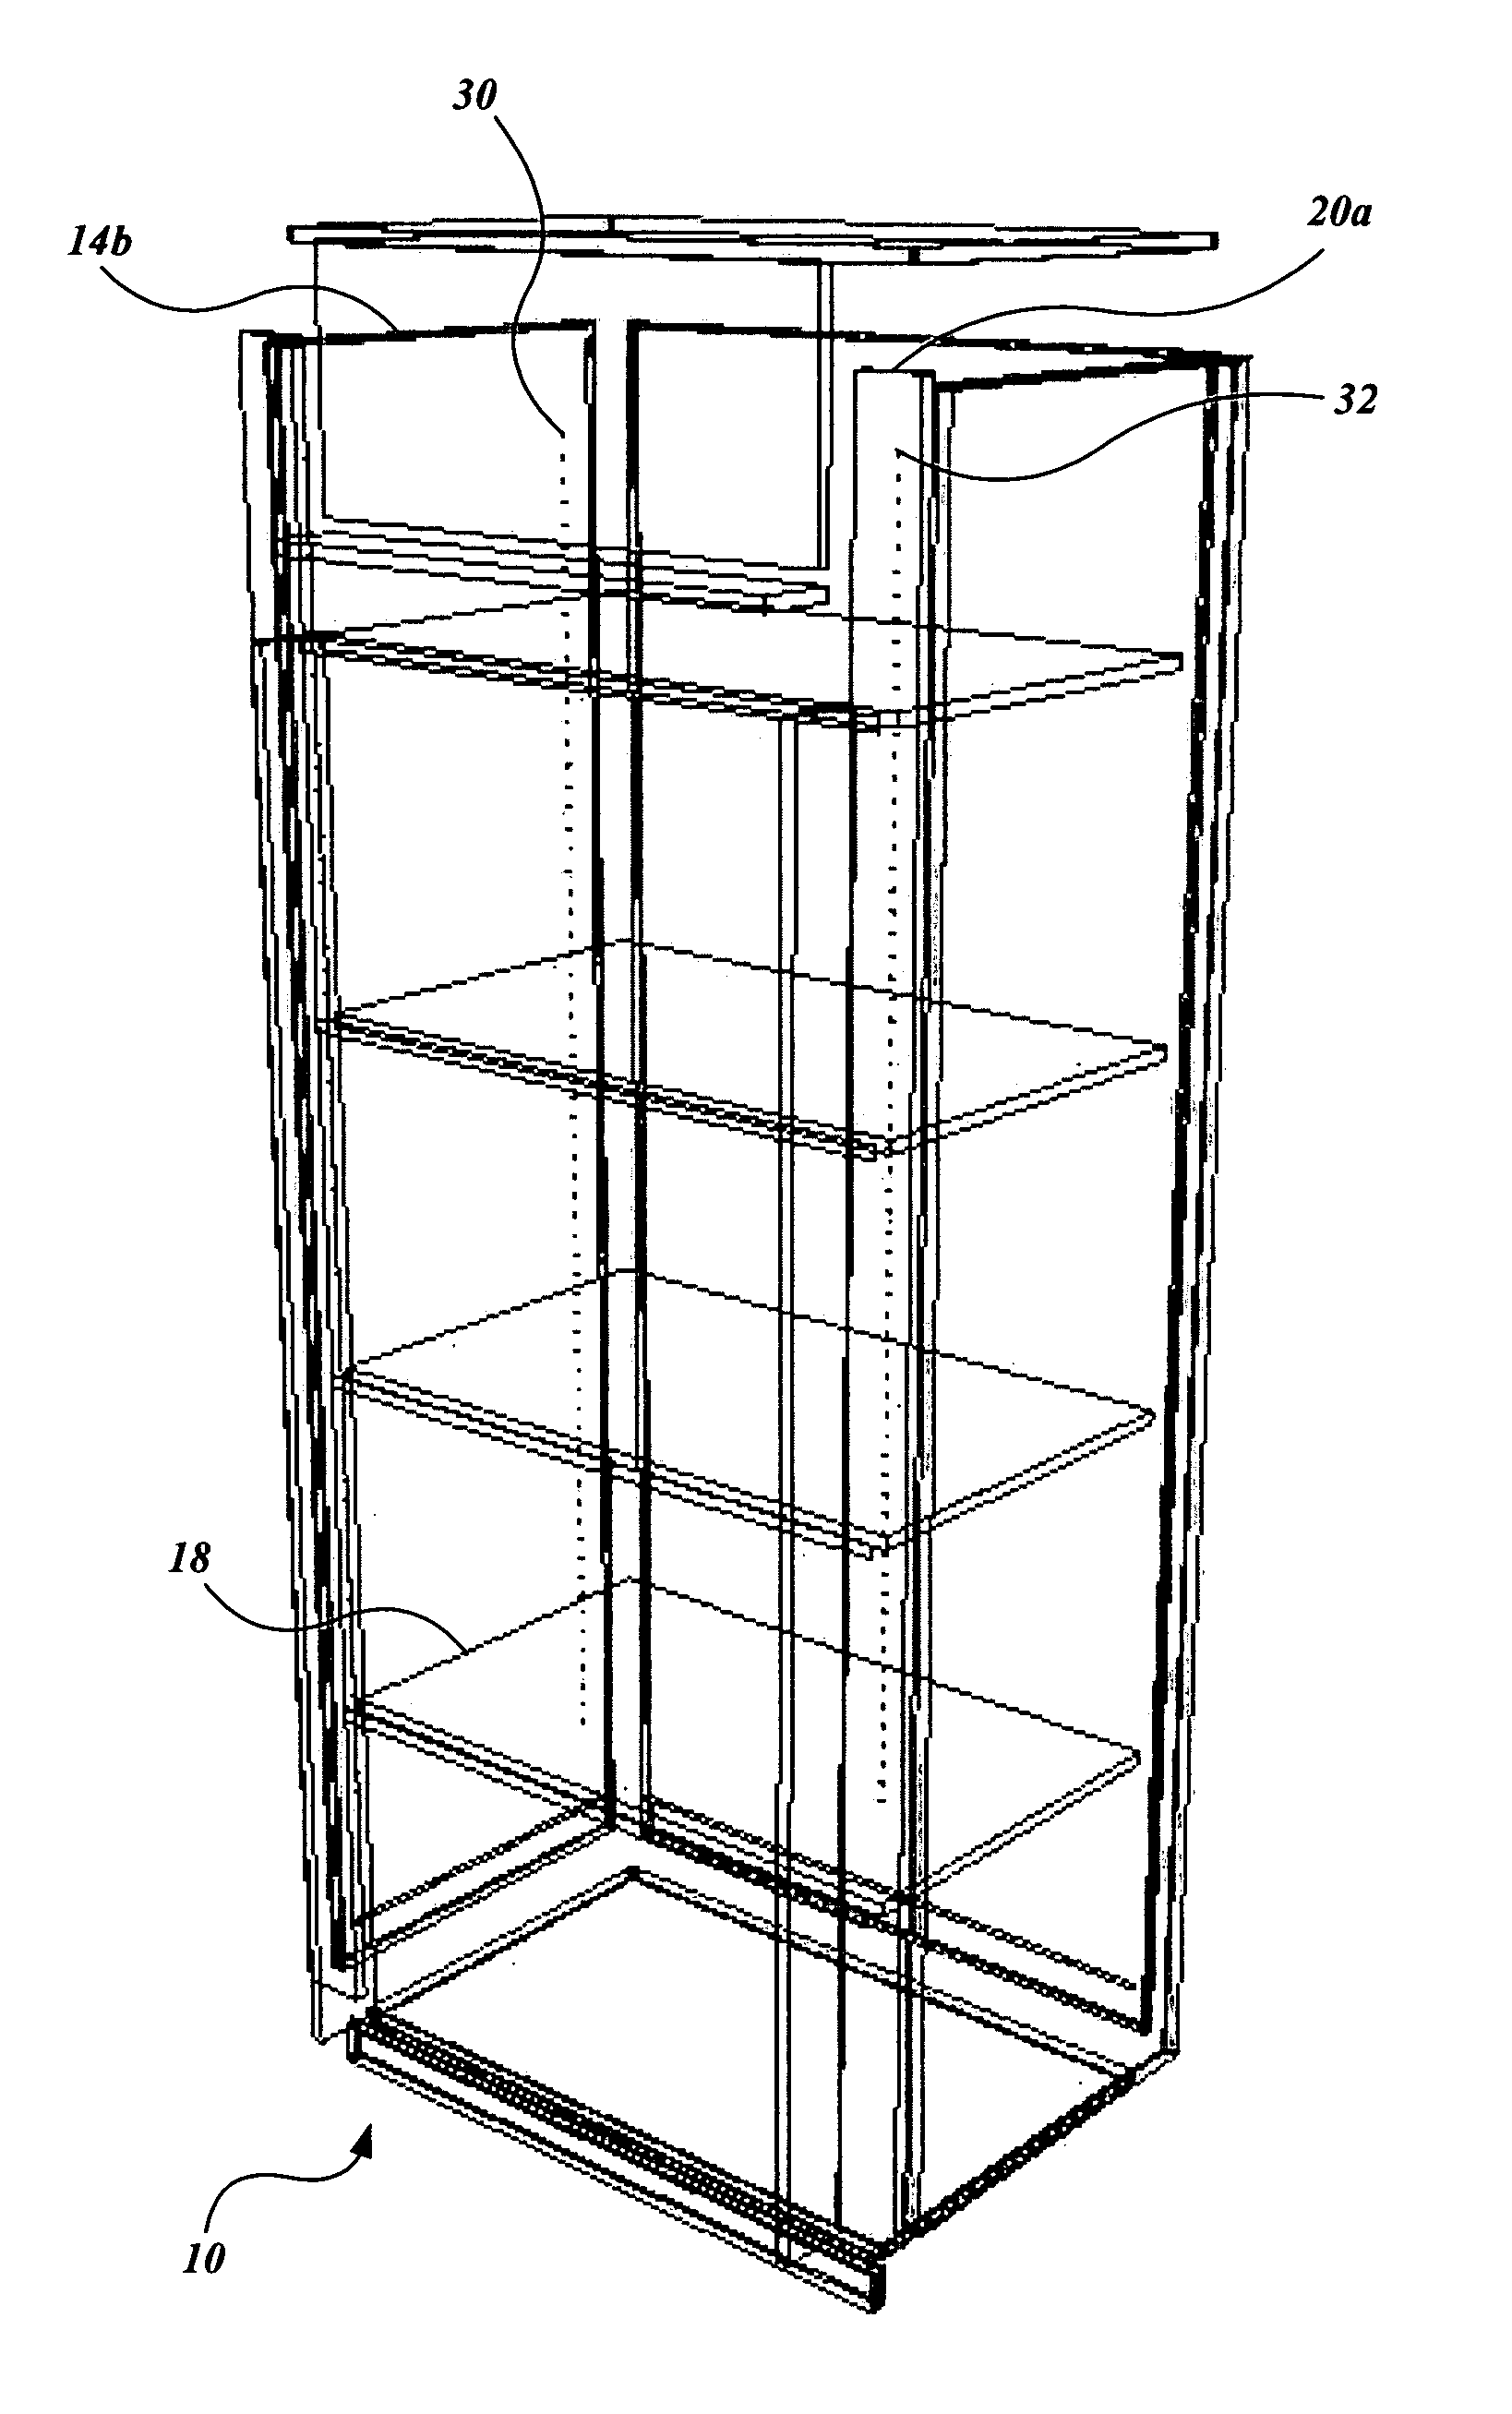 Method, system and article of manufacture for a modular room